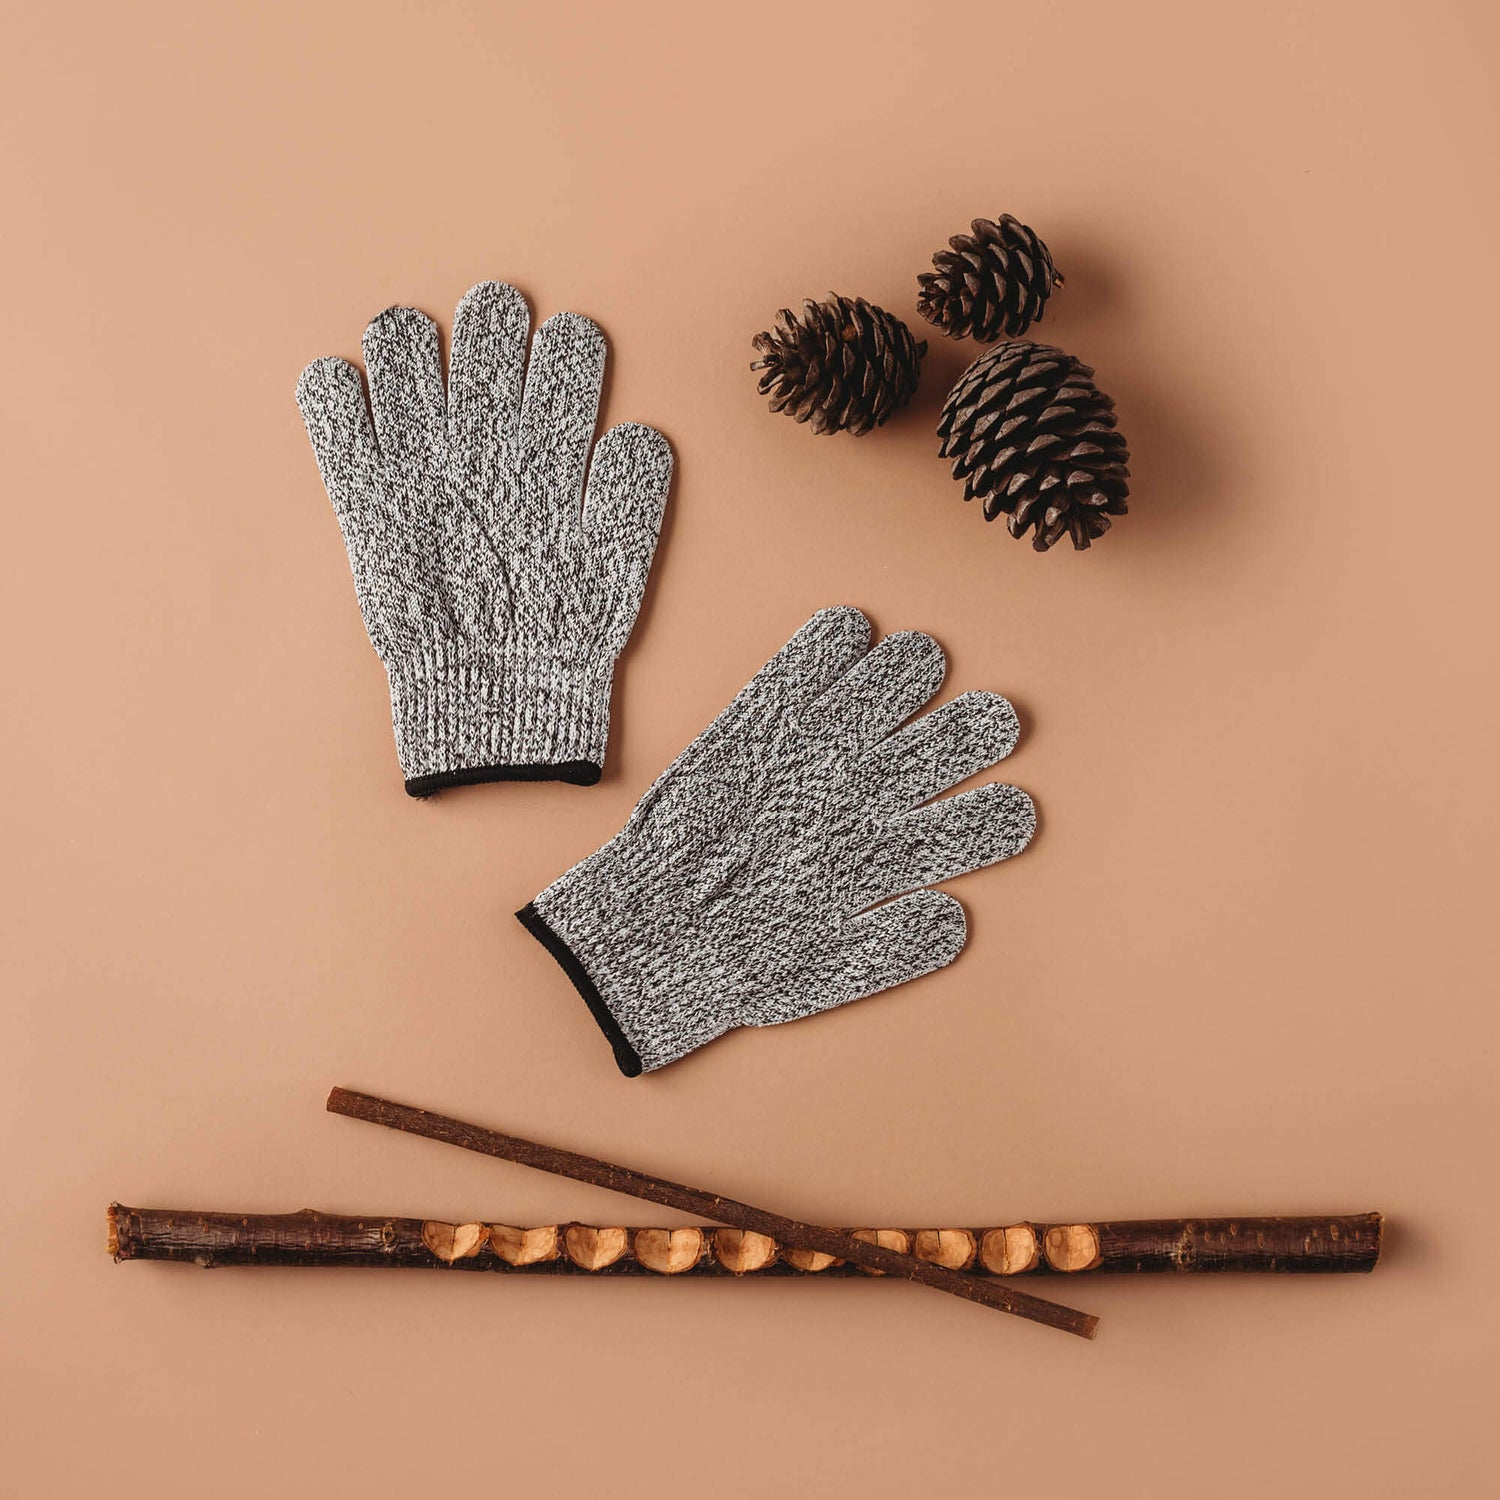 Cut resistant gloves for kids when doing wood whittling and using other tools for nature craft, from Your Wild Books. Level 5 HPPE protection.